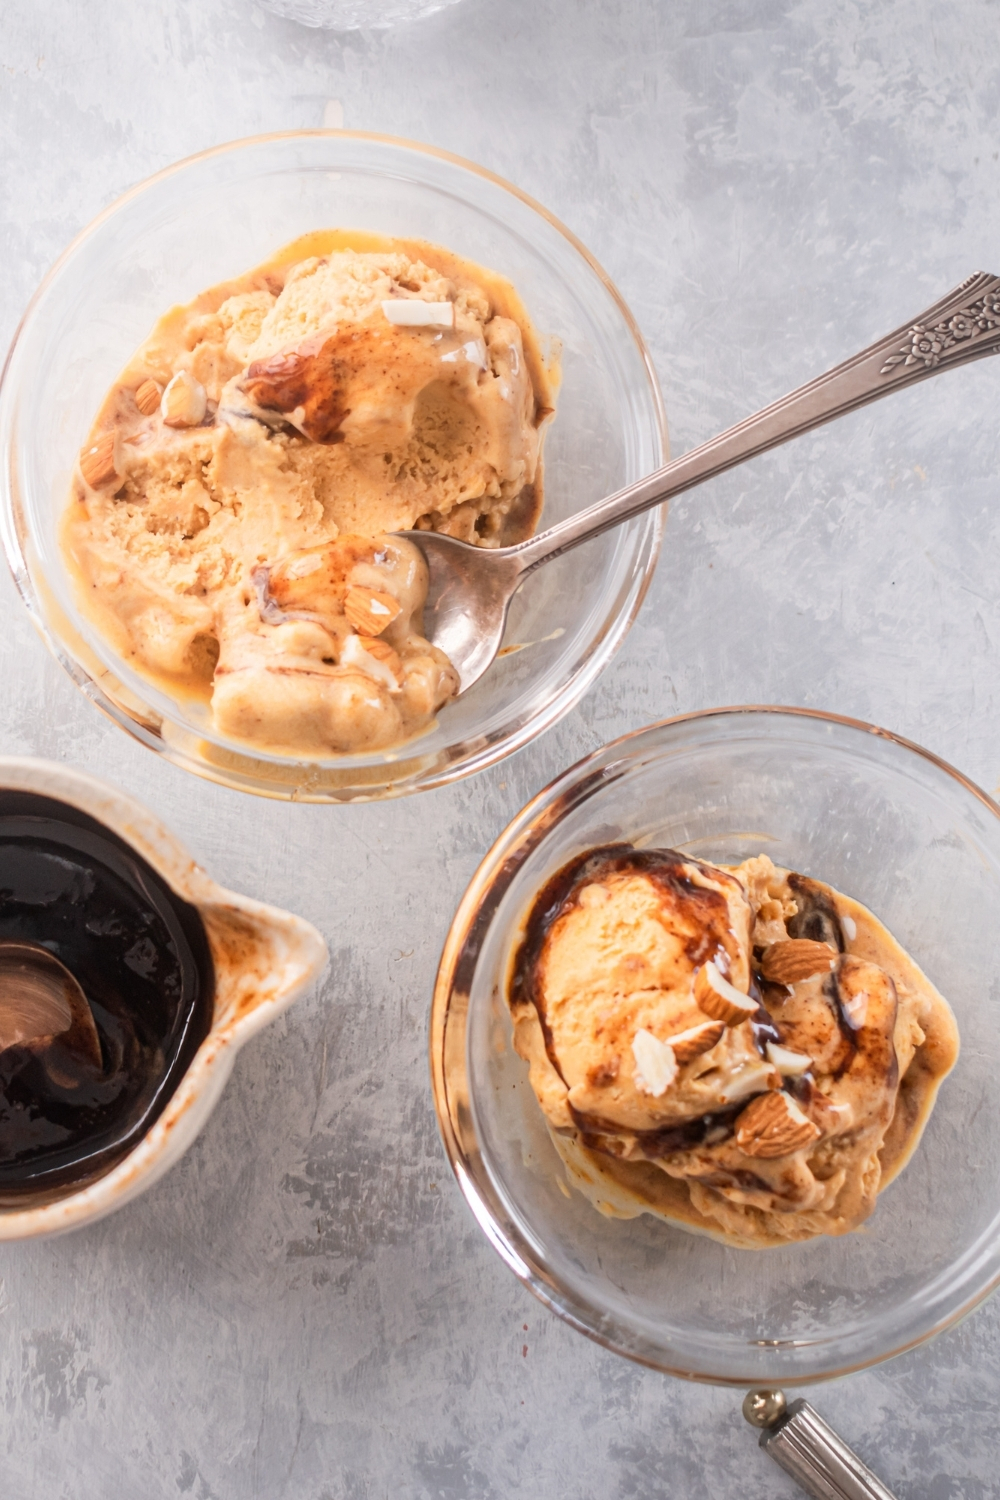 Two glass bowls filled with pumpkin ice cream on a gray counter. The bowl in the back has a spoon submerged in the pumpkin ice cream and to the left of the two bowls as part of a glass pitcher with cinnamon syrup in it.